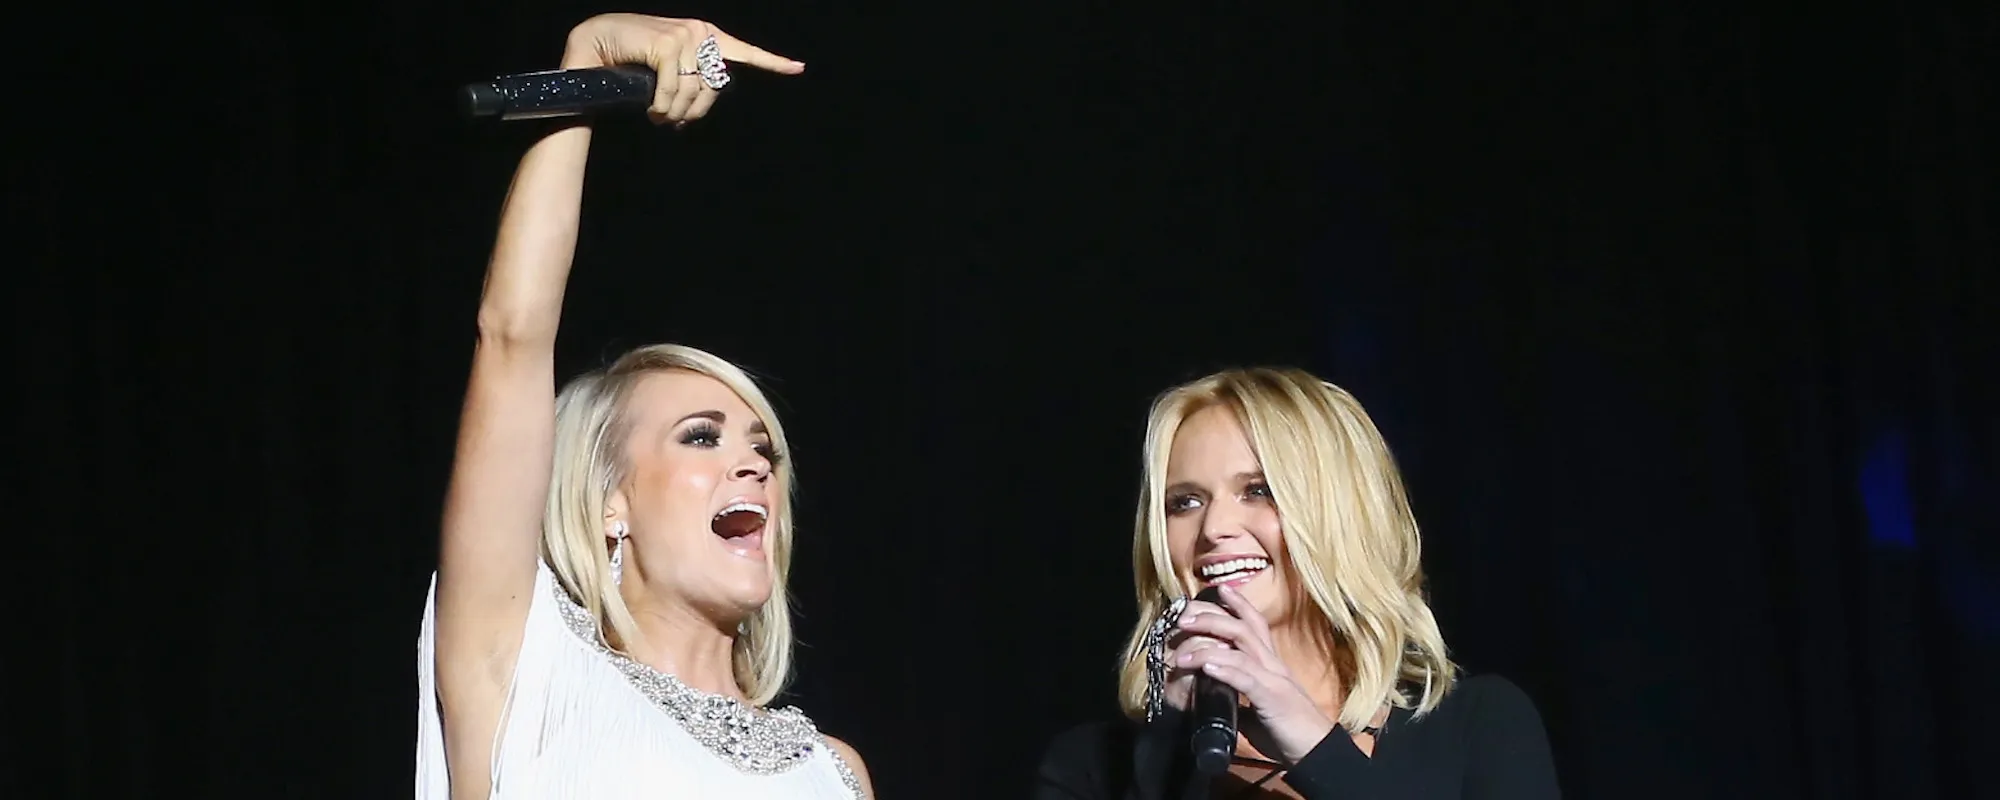 The Meaning Behind Carrie Underwood and Miranda Lambert’s ‘Thelma and Louise’-Inspired “Somethin’ Bad”